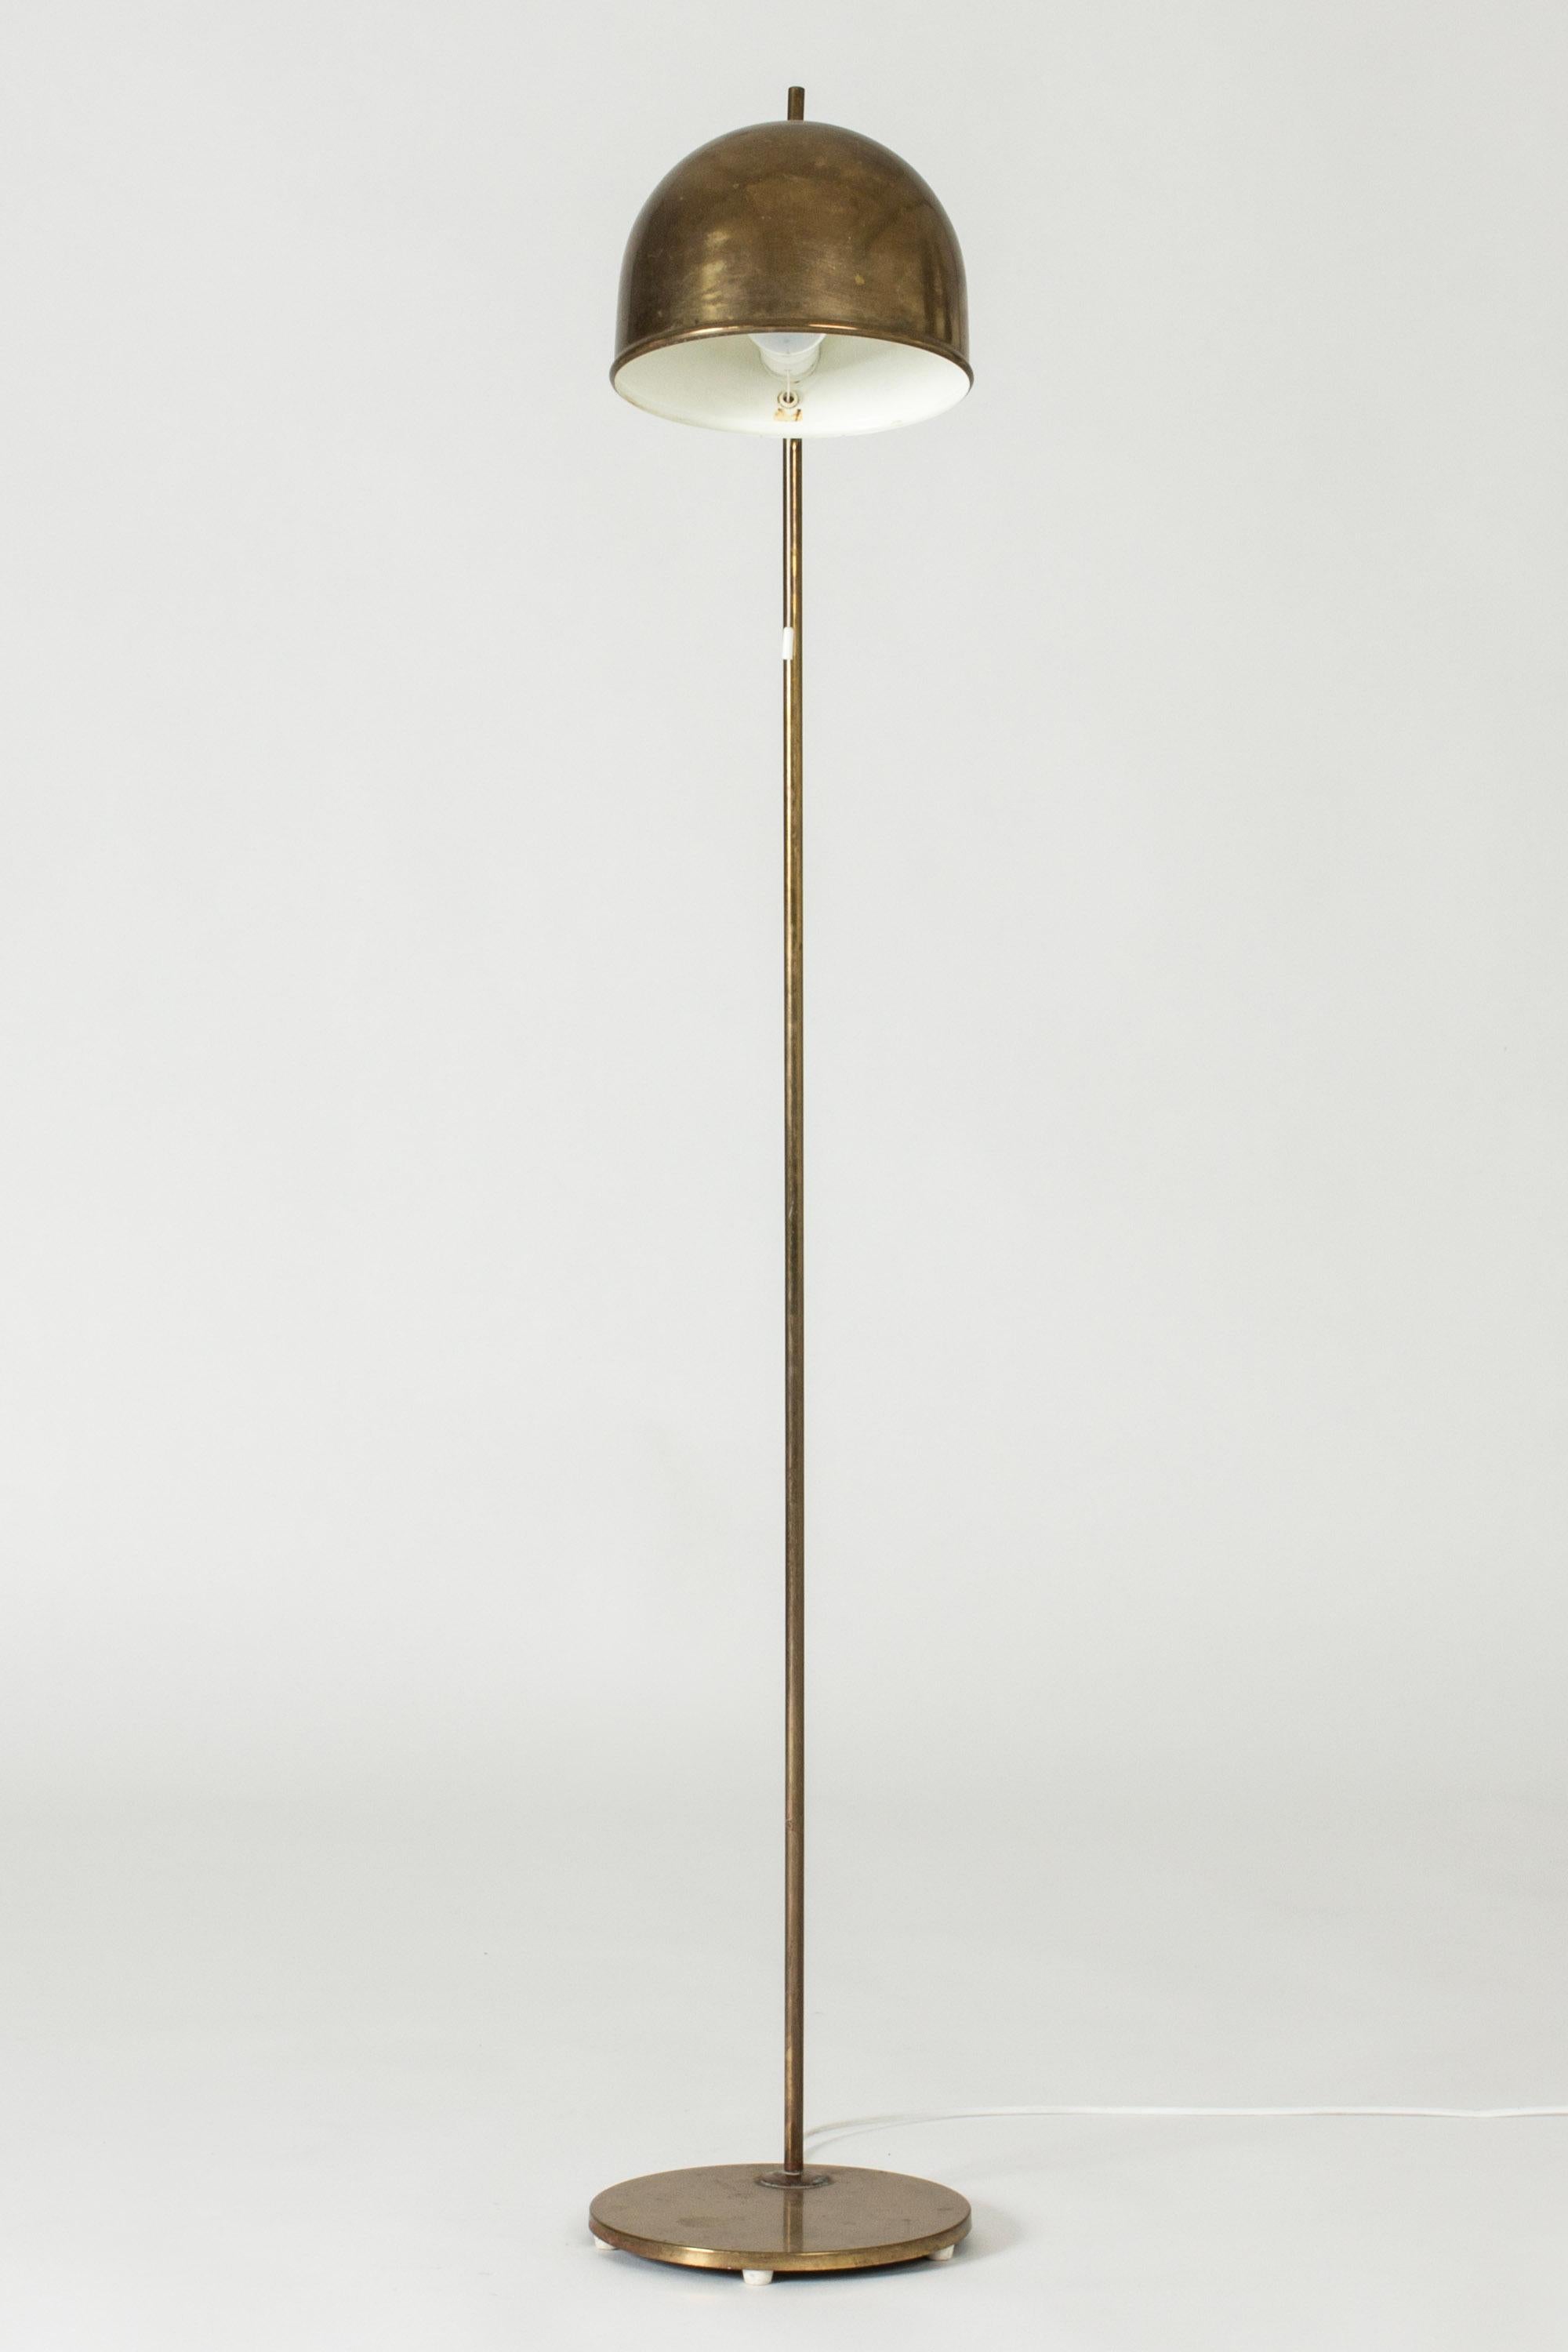 Brass floor lamp from Bergboms, with a sleek, rounded design topped off with a little tip at the top of the lampshade.